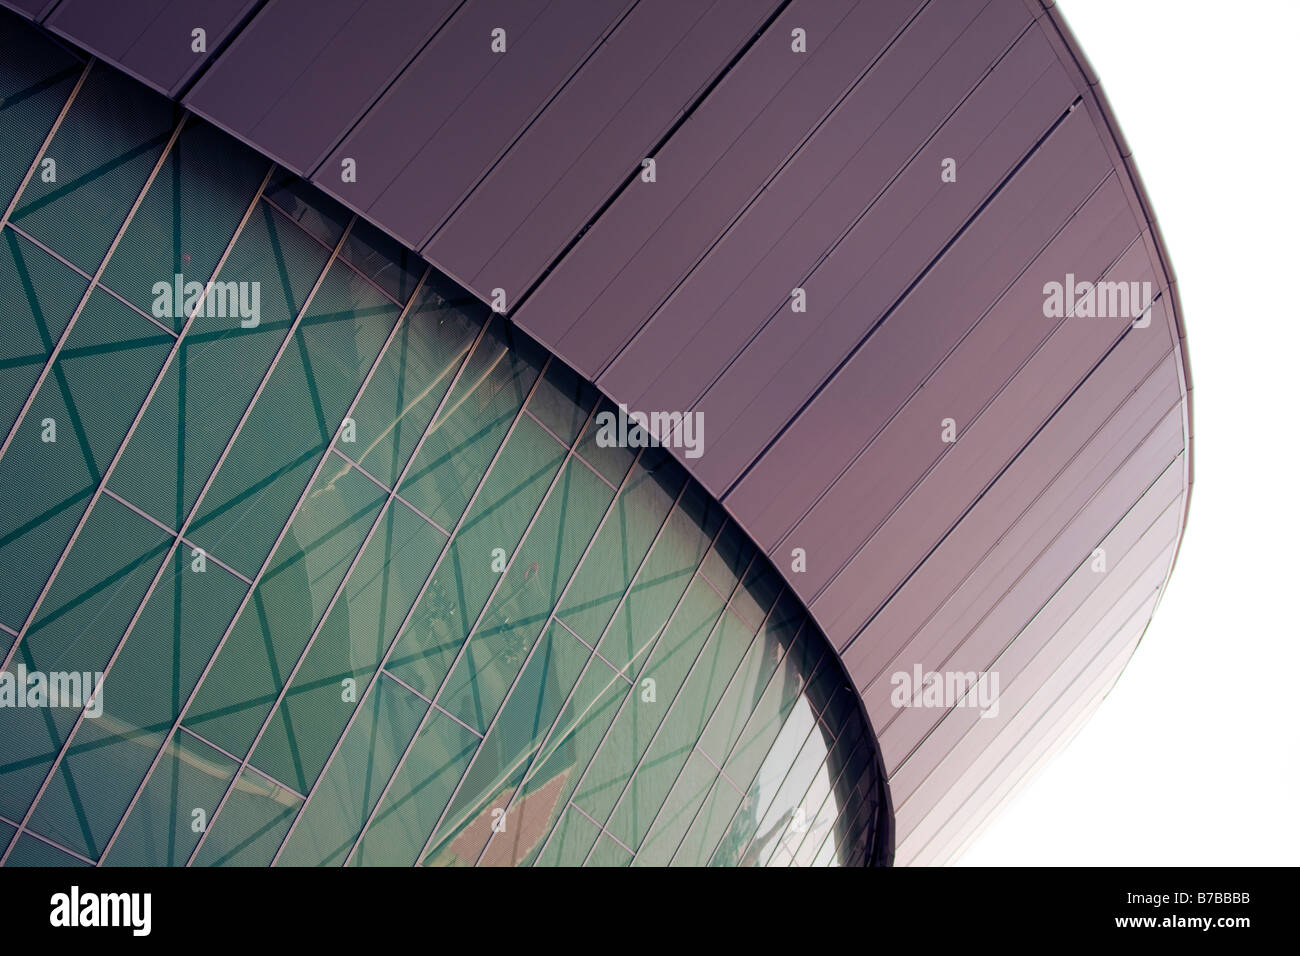 Abstract architecture at the Liverpool Echo Arena from the outside showing the glass and metal structure, Merseyside, UK Stock Photo